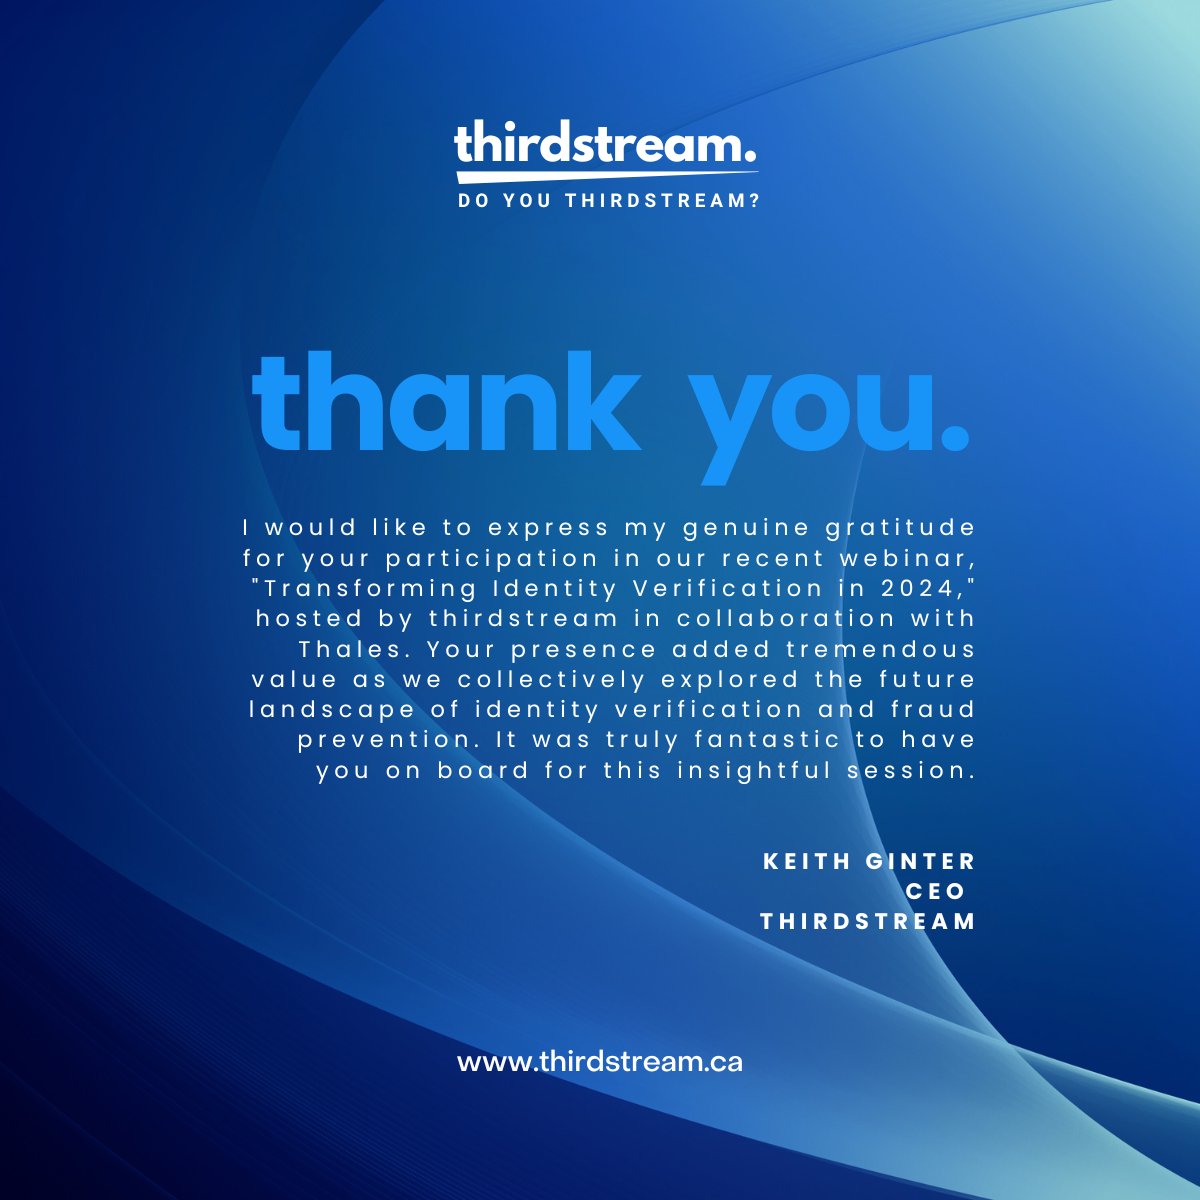 Thank you to everyone who joined our insightful webinar, 'Transforming Identity Verification in 2024.' Your presence enriched the discussion on the future of identity verification and fraud prevention. Grateful for your participation! #thirdstream #thales